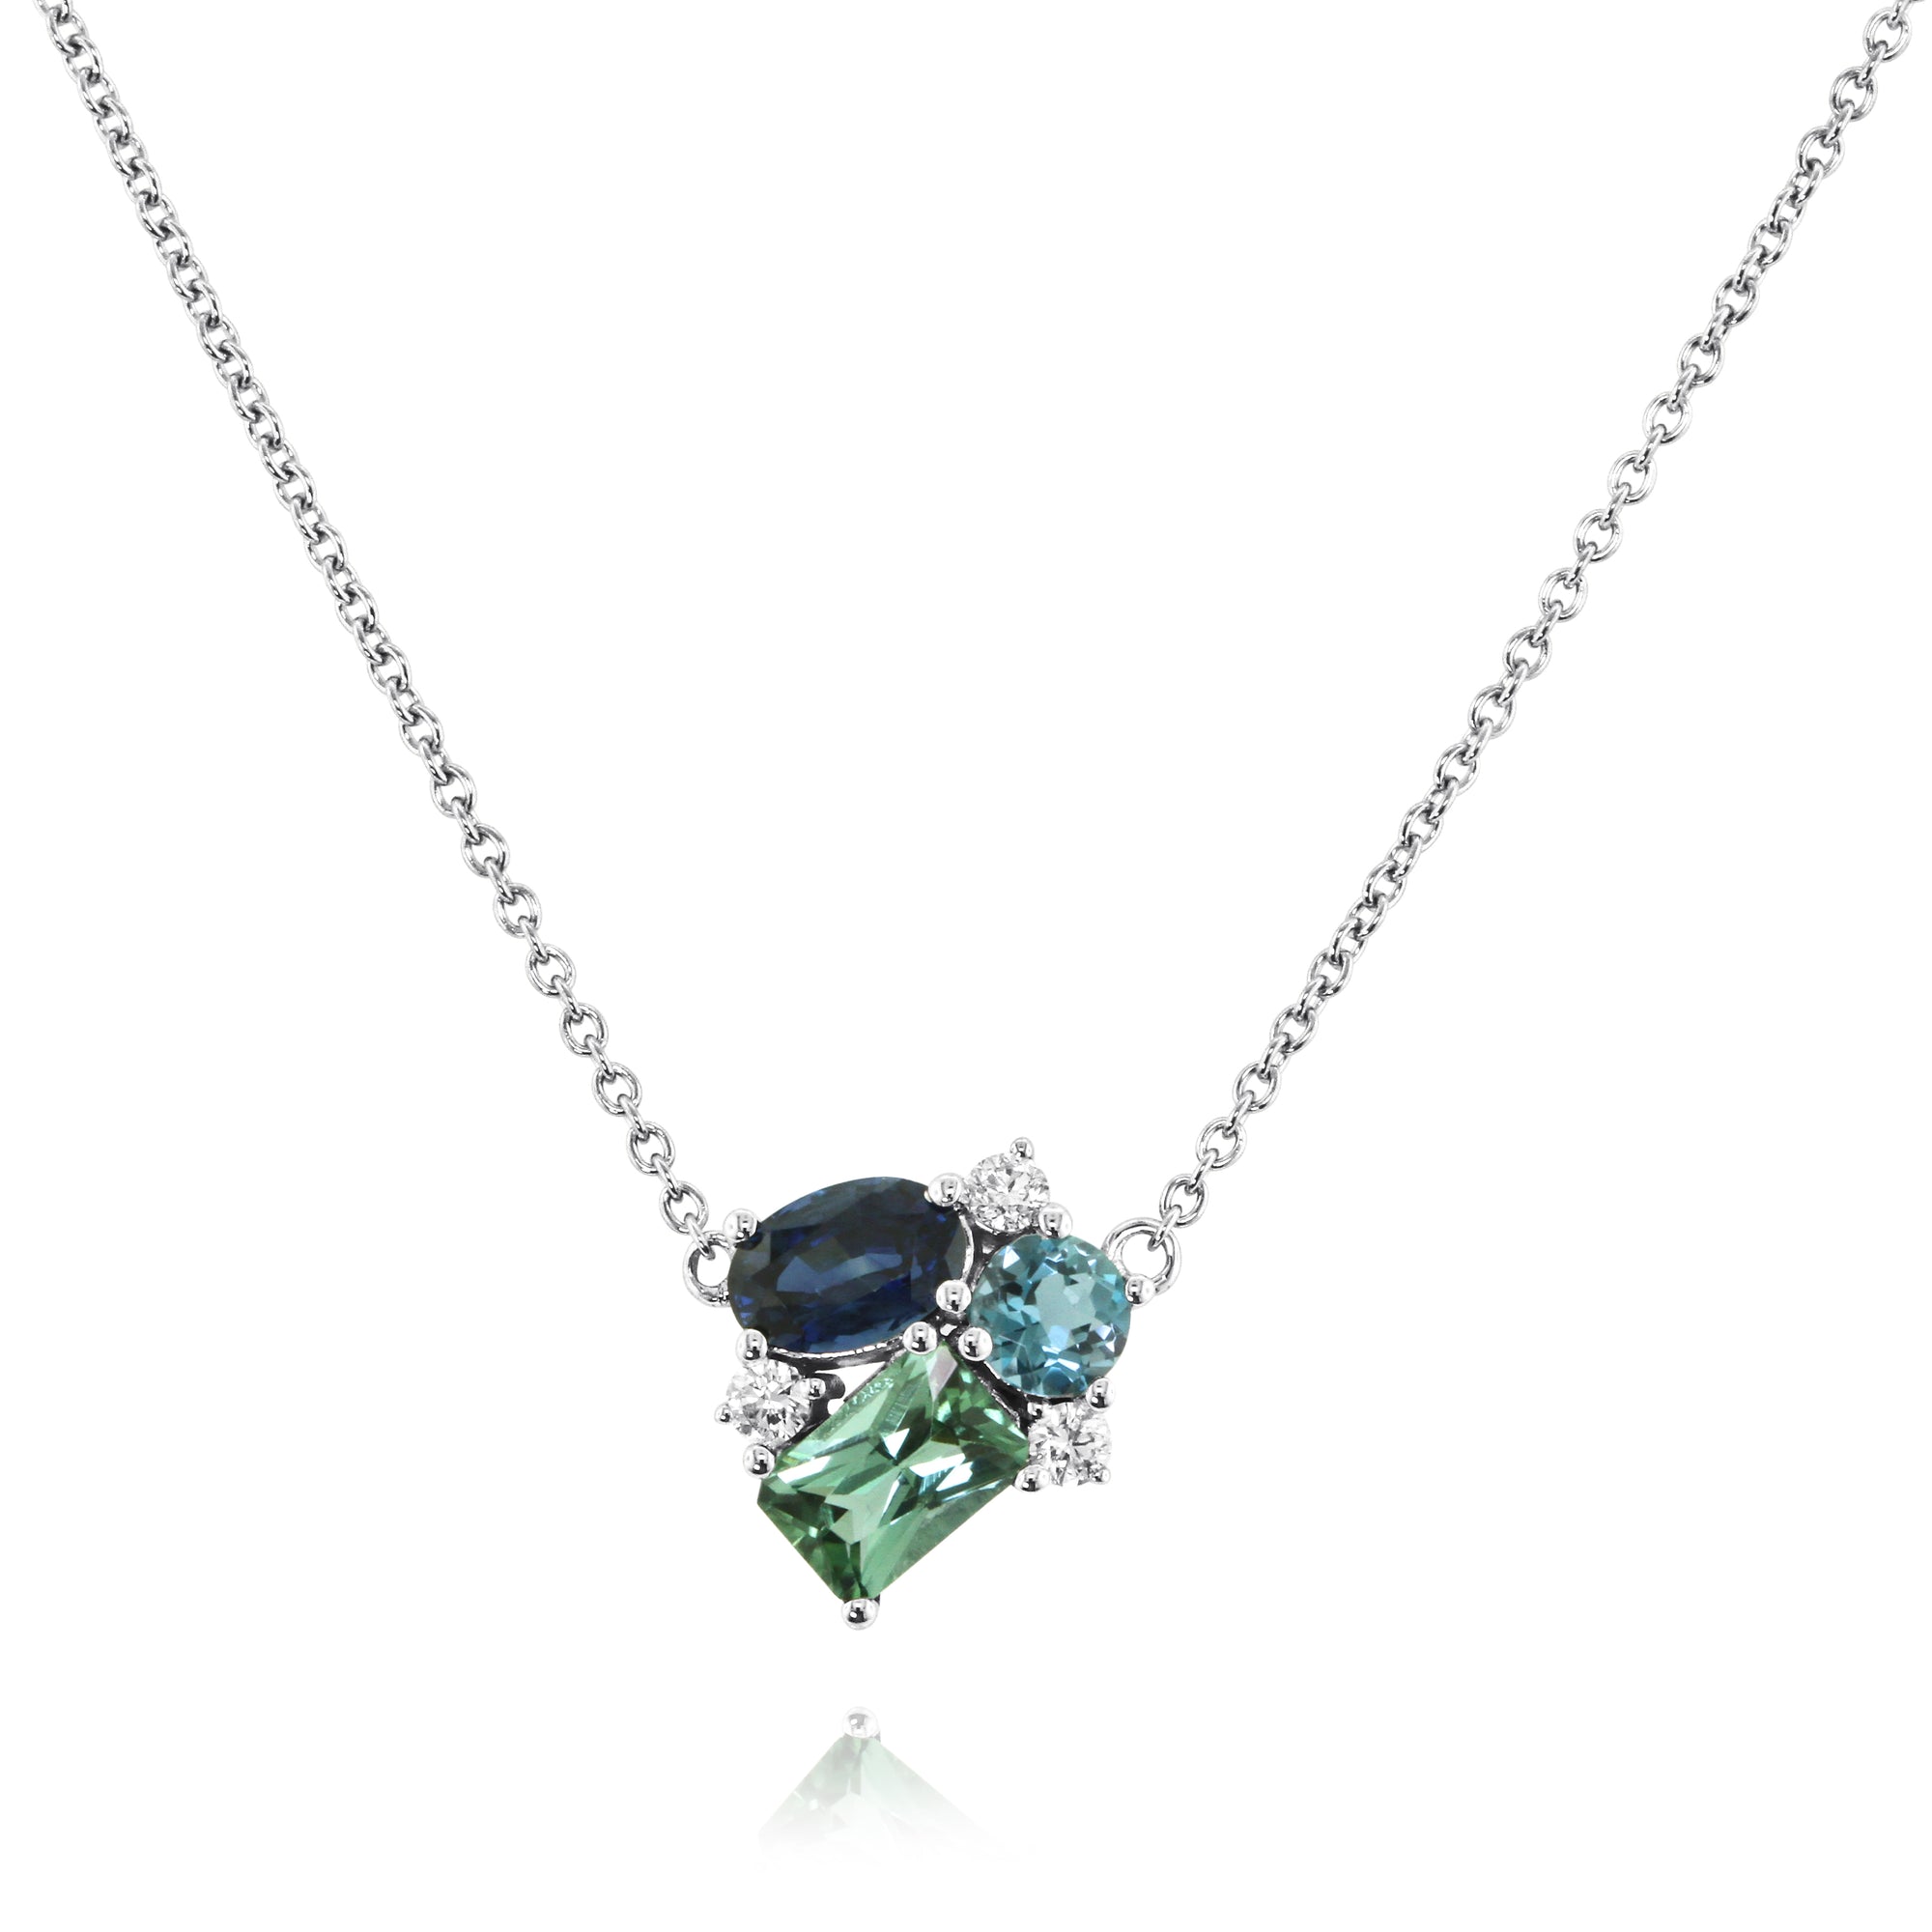 Sapphire, Tourmaline, Topaz & Diamond Necklace by Yael available at Talisman Collection Fine Jewelers in El Dorado Hills, CA and online. Sapphire, Tourmaline, and Topaz, oh my! The soft, cool-hued tones of this clustered gem necklace make it perfect for every day. The pendant features 0.58 cts of blue sapphire, 0.50 cts of rad green tourmaline, 0.32 cts of blue topaz and 0.09 cts of diamonds set in 14k white gold on a 16" chain.